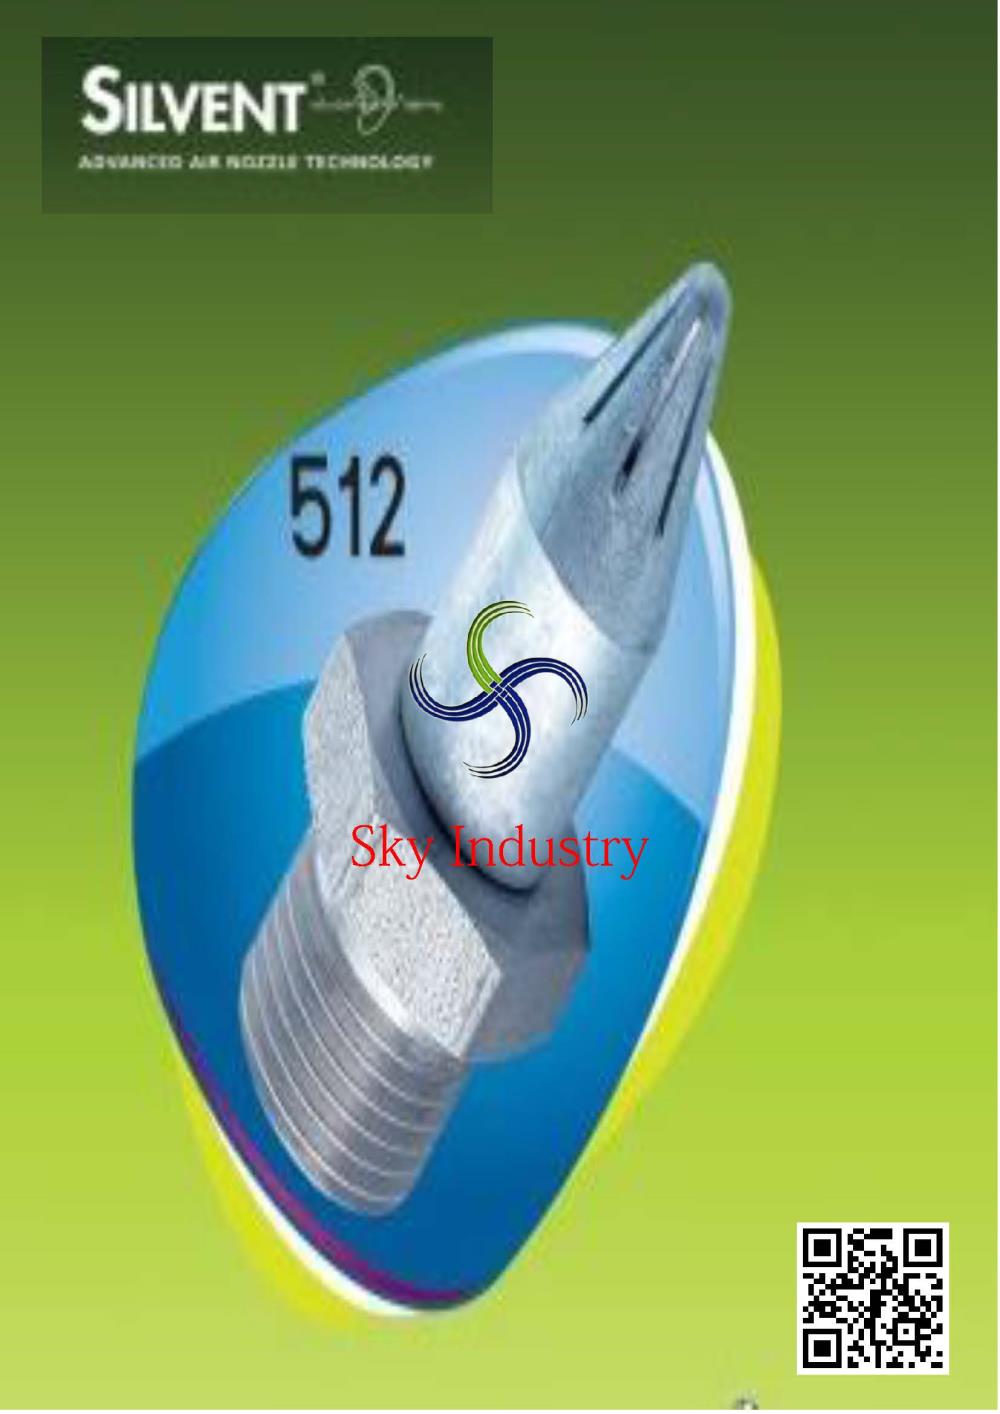 Cone Air Nozzles No.512,slot nozzles.,Silvent,Industrial Services/Advertising